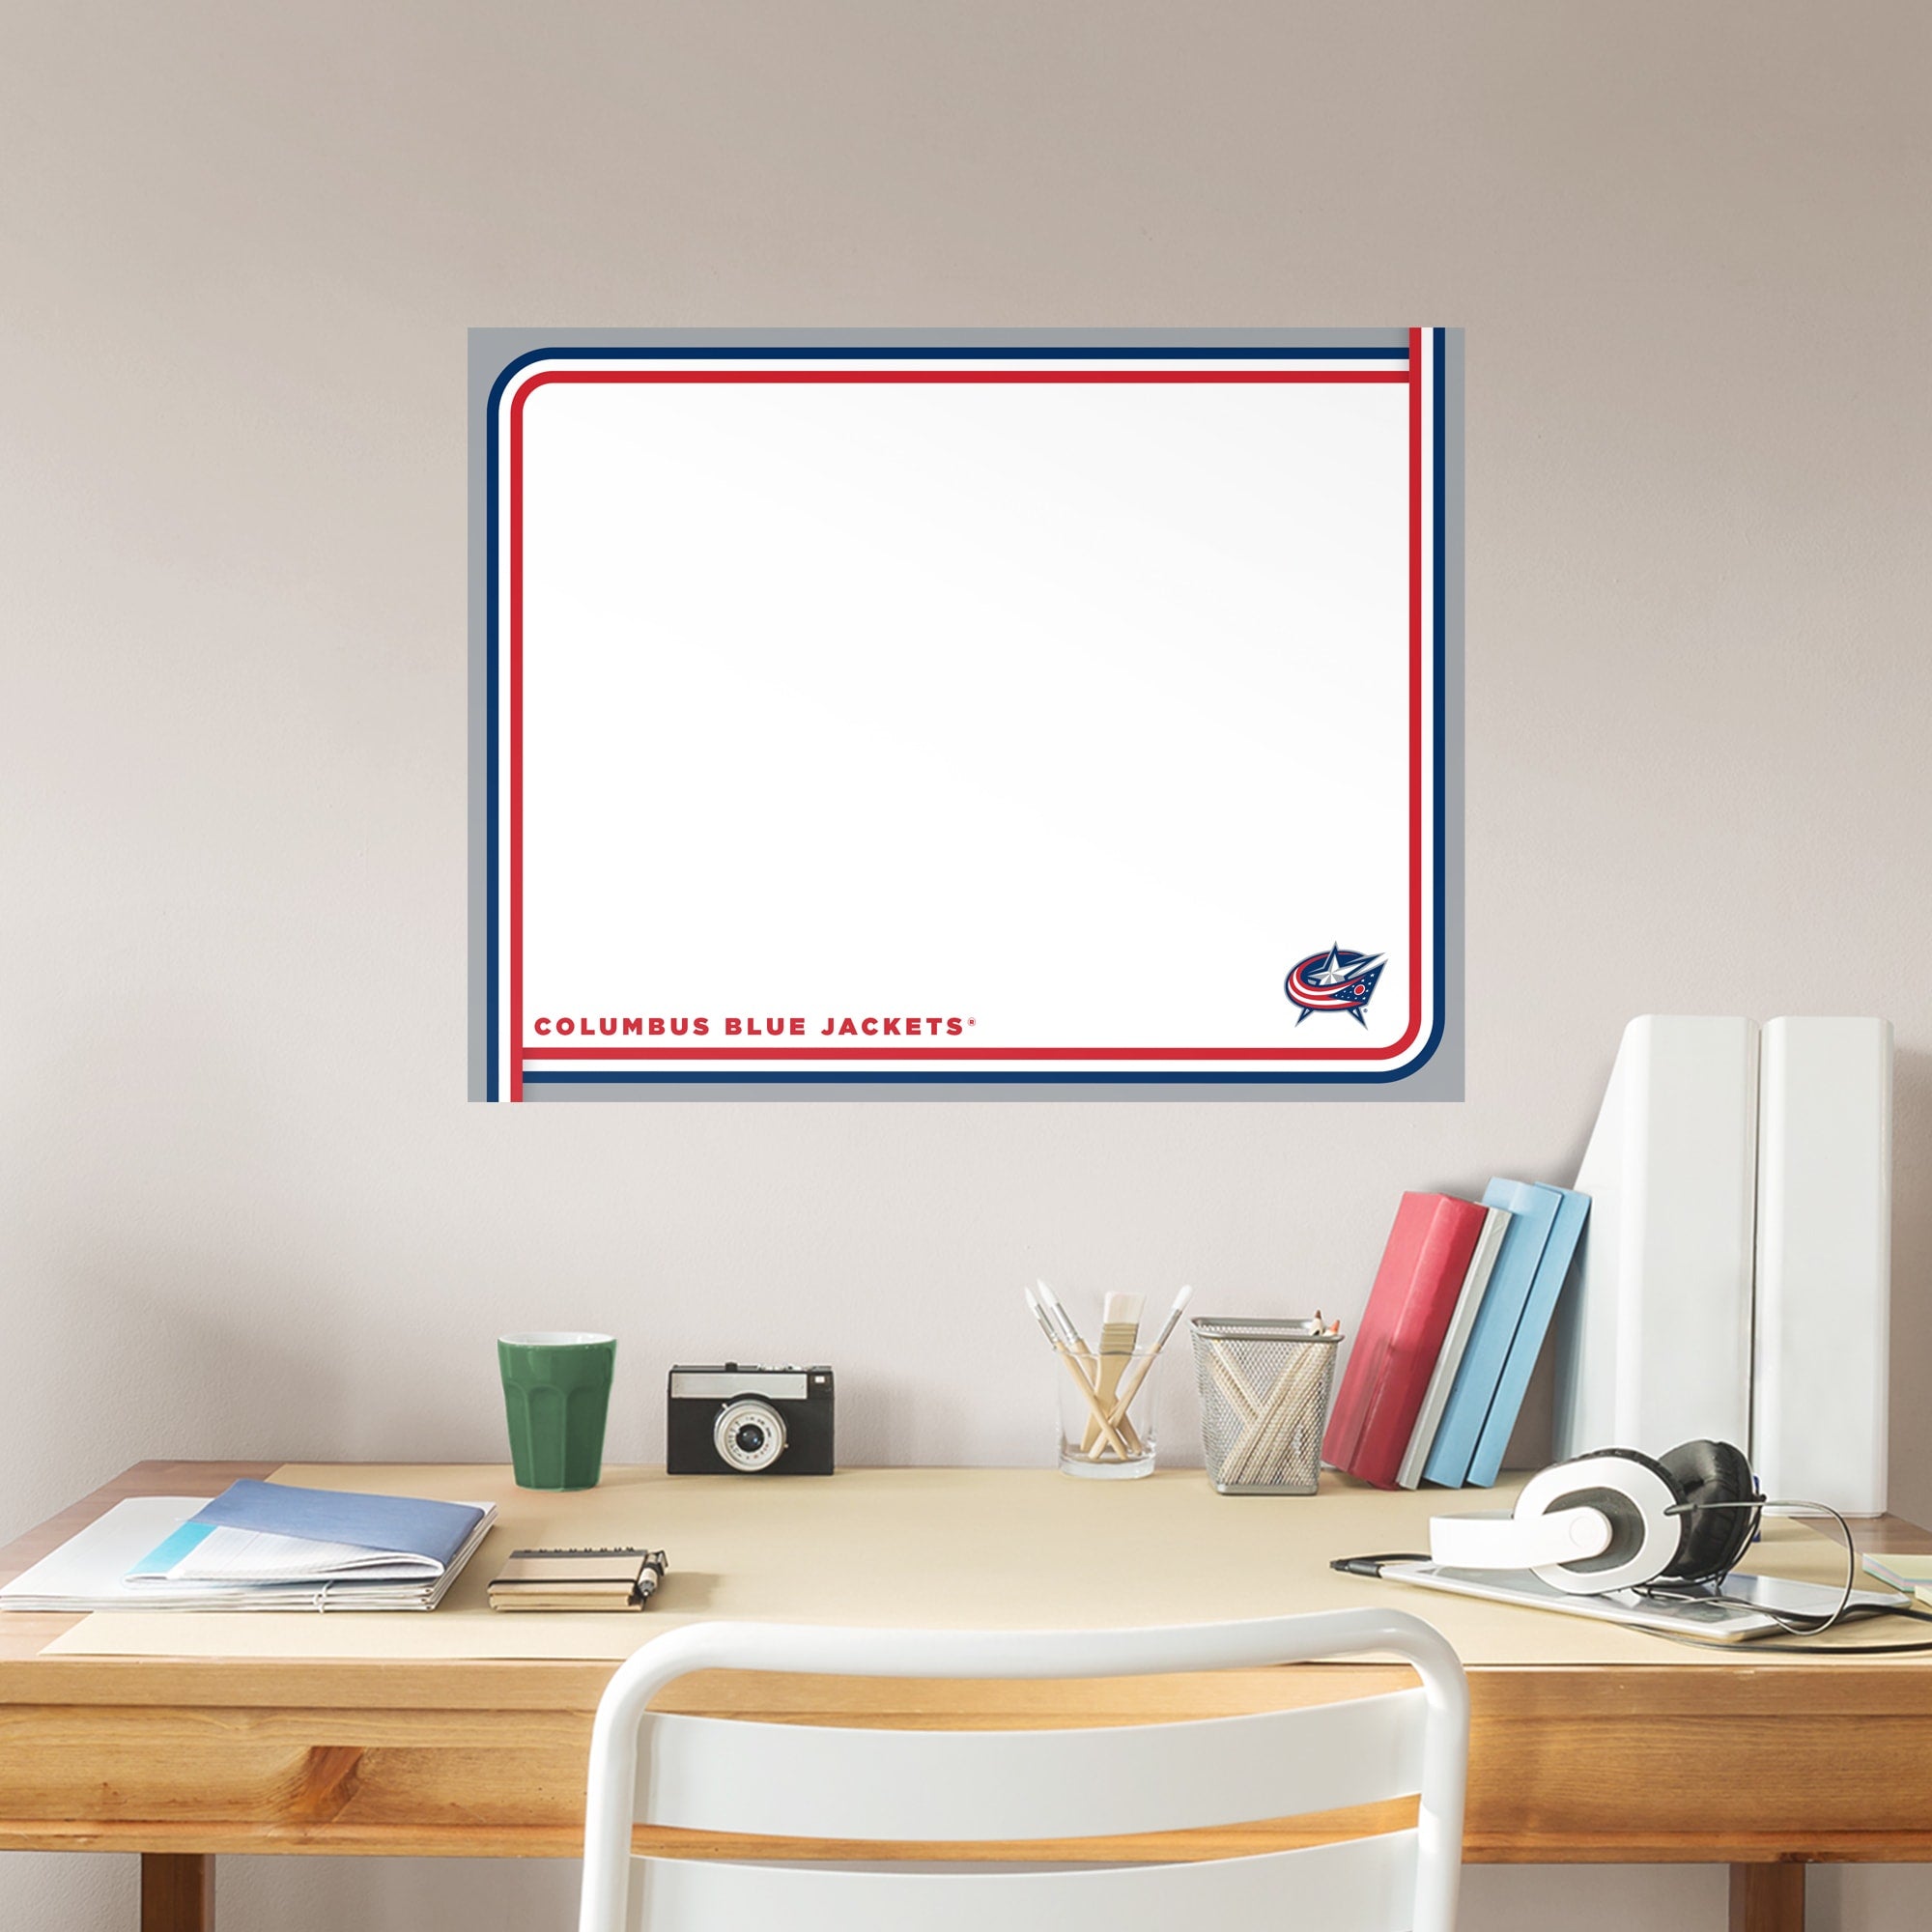 Columbus Blue Jackets: Dry Erase Whiteboard - X-Large Officially Licensed NHL Removable Wall Decal XL by Fathead | Vinyl